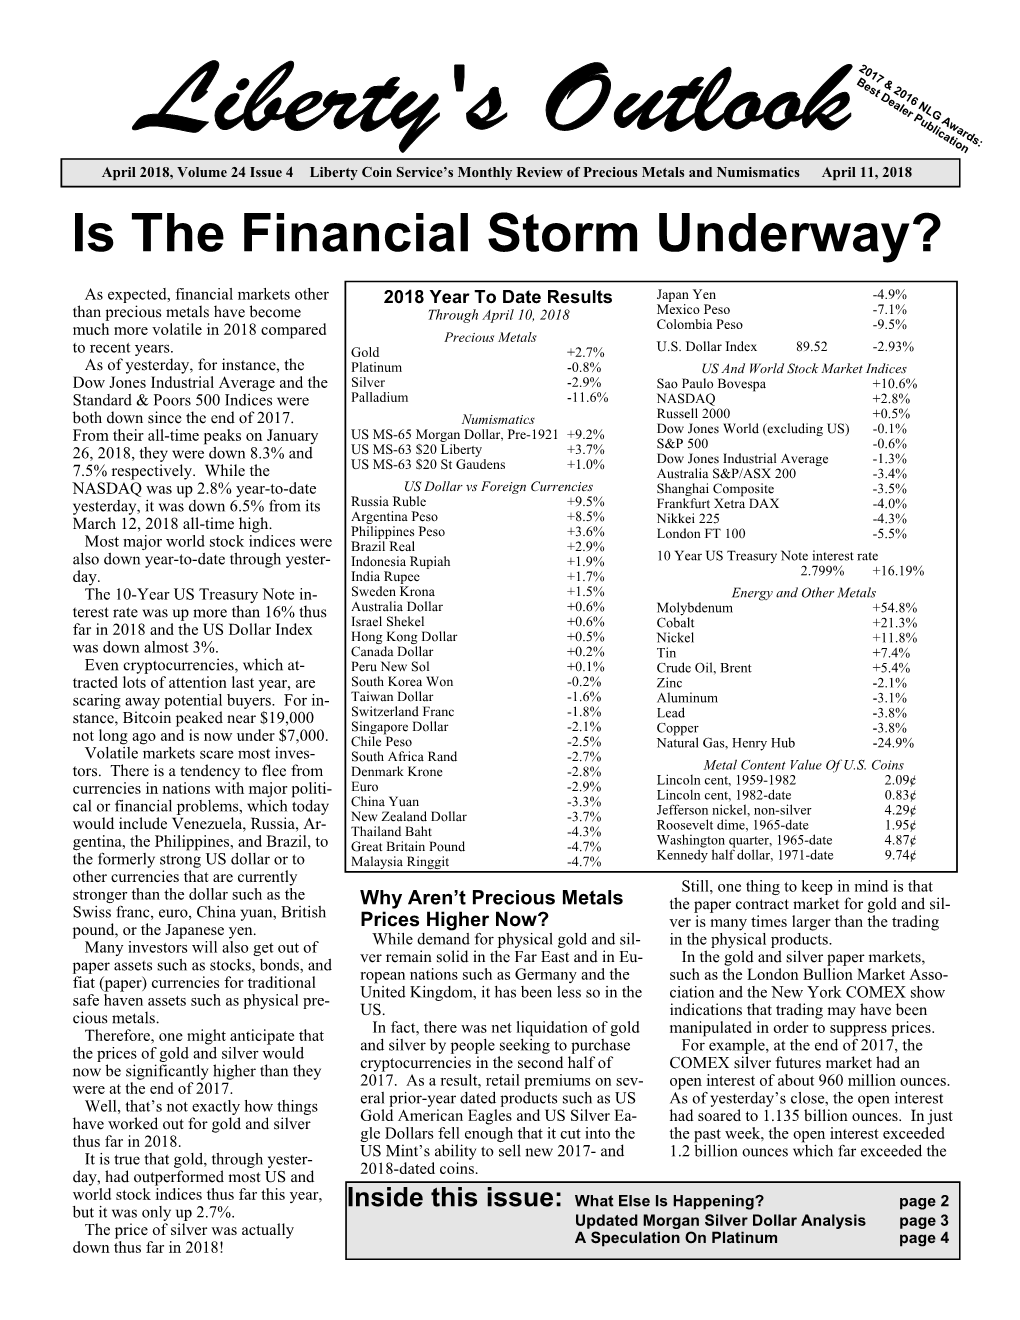 Is the Financial Storm Underway?